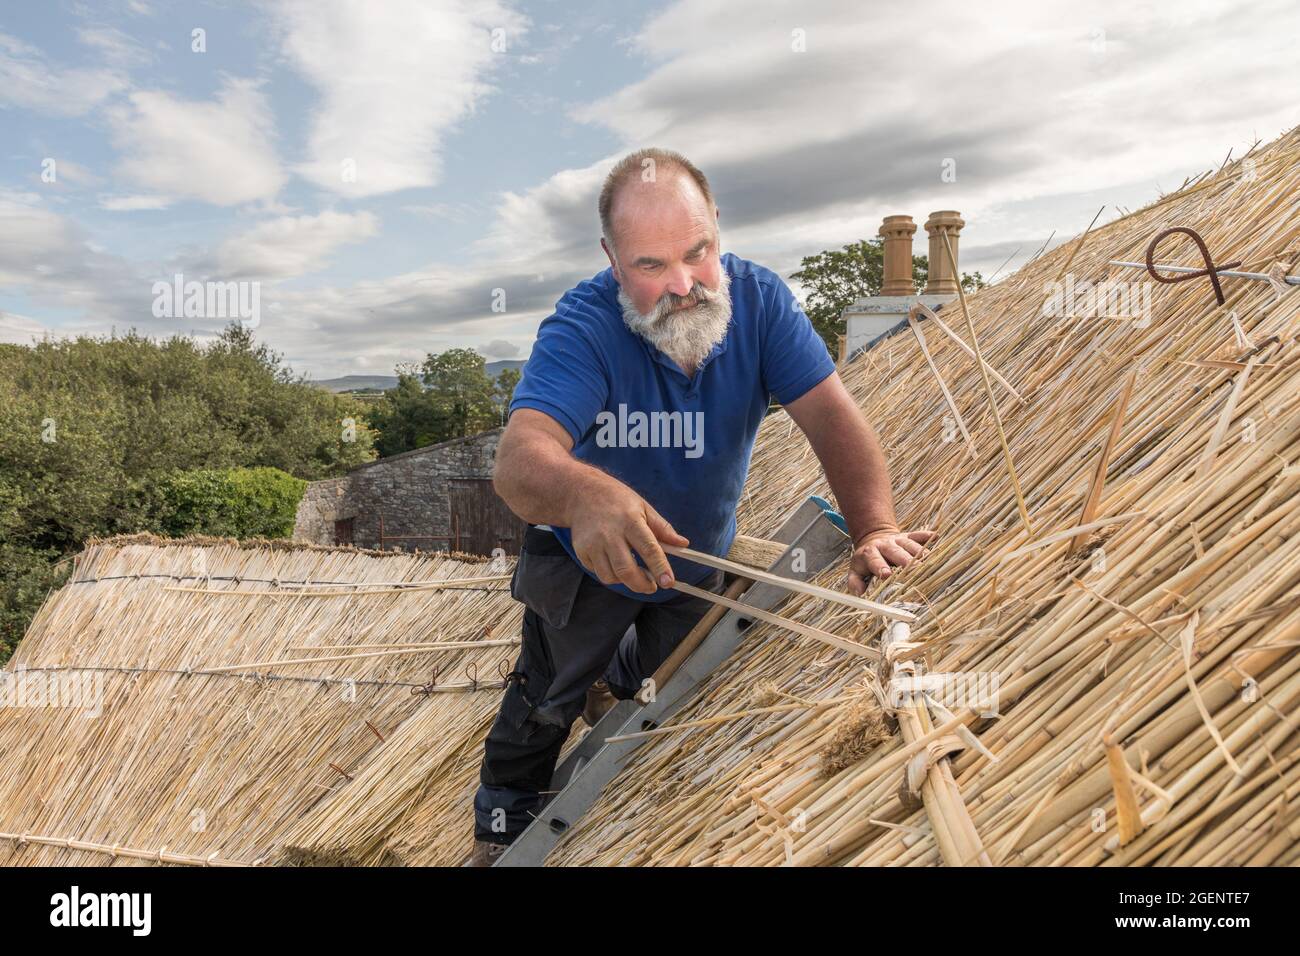 Fenit, Kerry, Ireland. 19th August, 2021. Master thatcher, Richard Ó Loideoin  working at the traditional craft of thatching on a roof at Chapeltown n Stock Photo